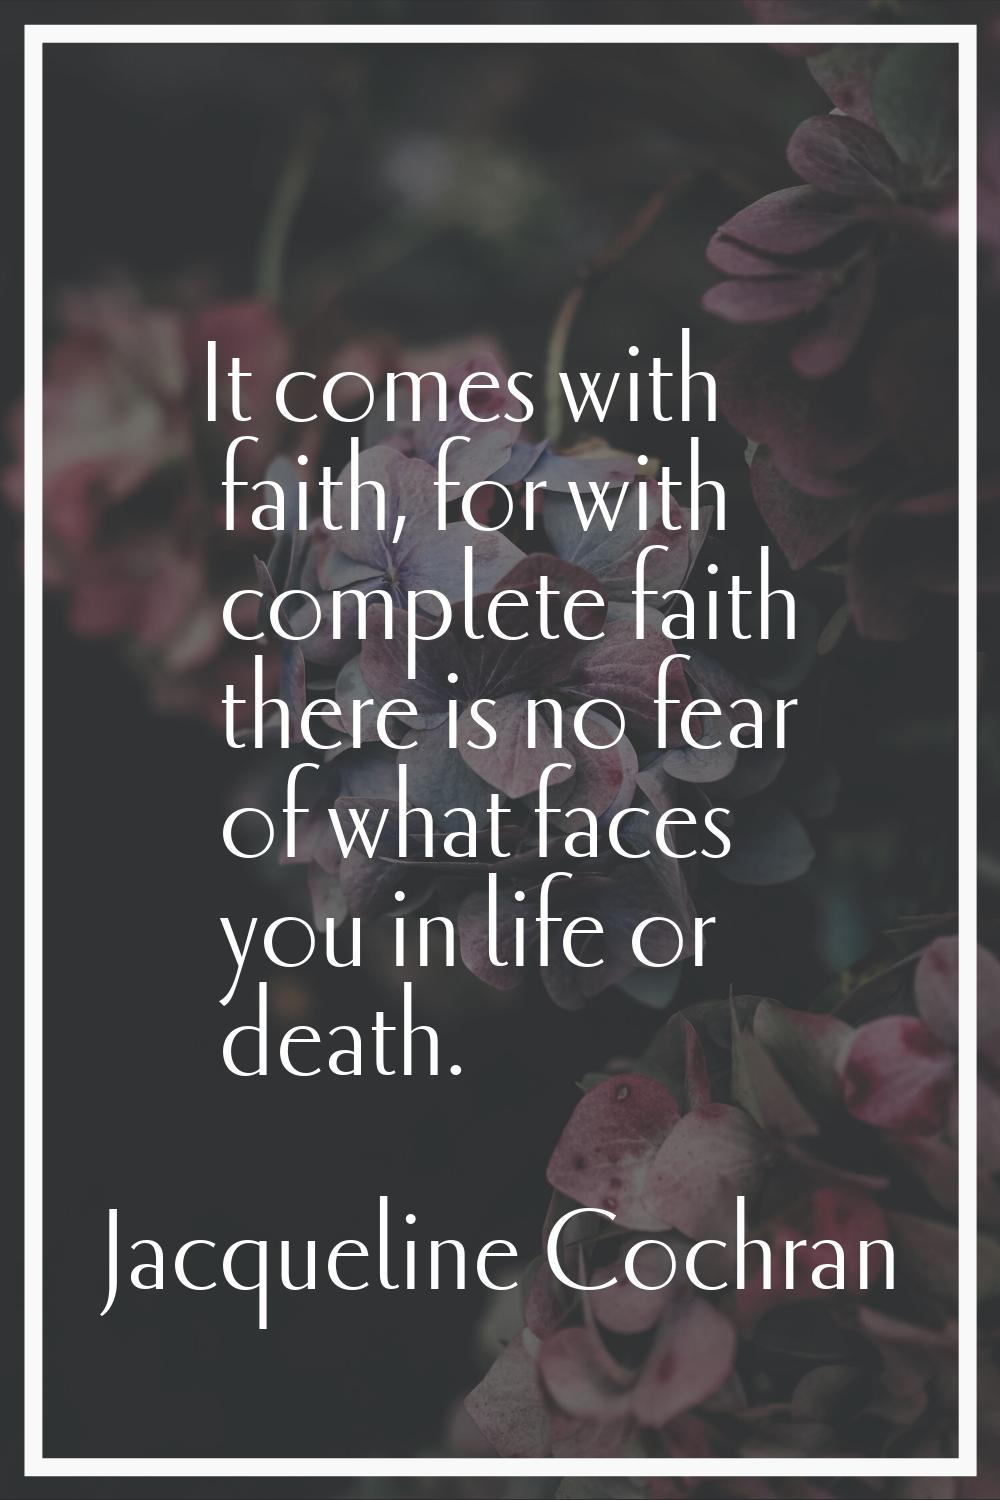 It comes with faith, for with complete faith there is no fear of what faces you in life or death.